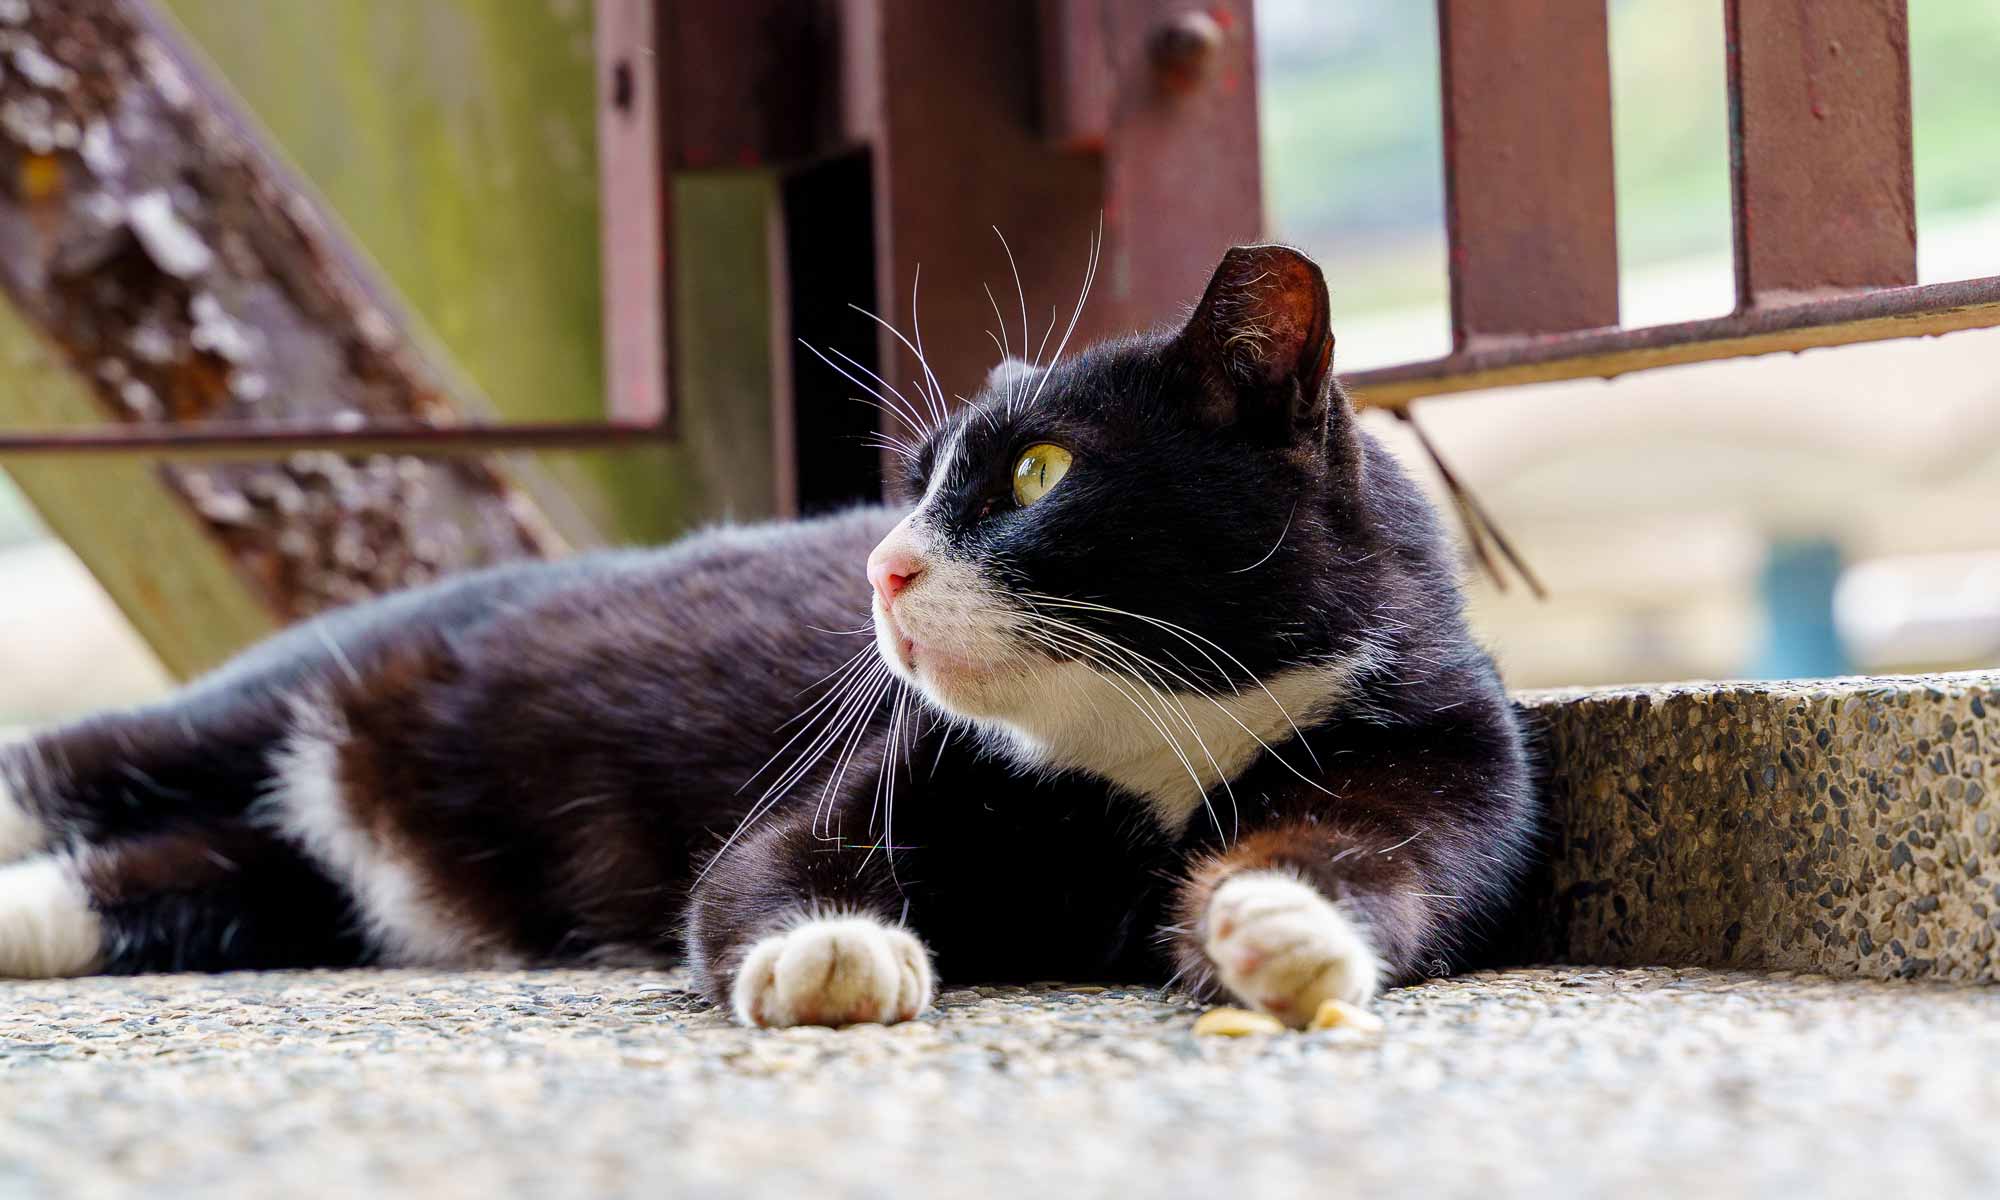 A cat gazes at something while resting on the ground.